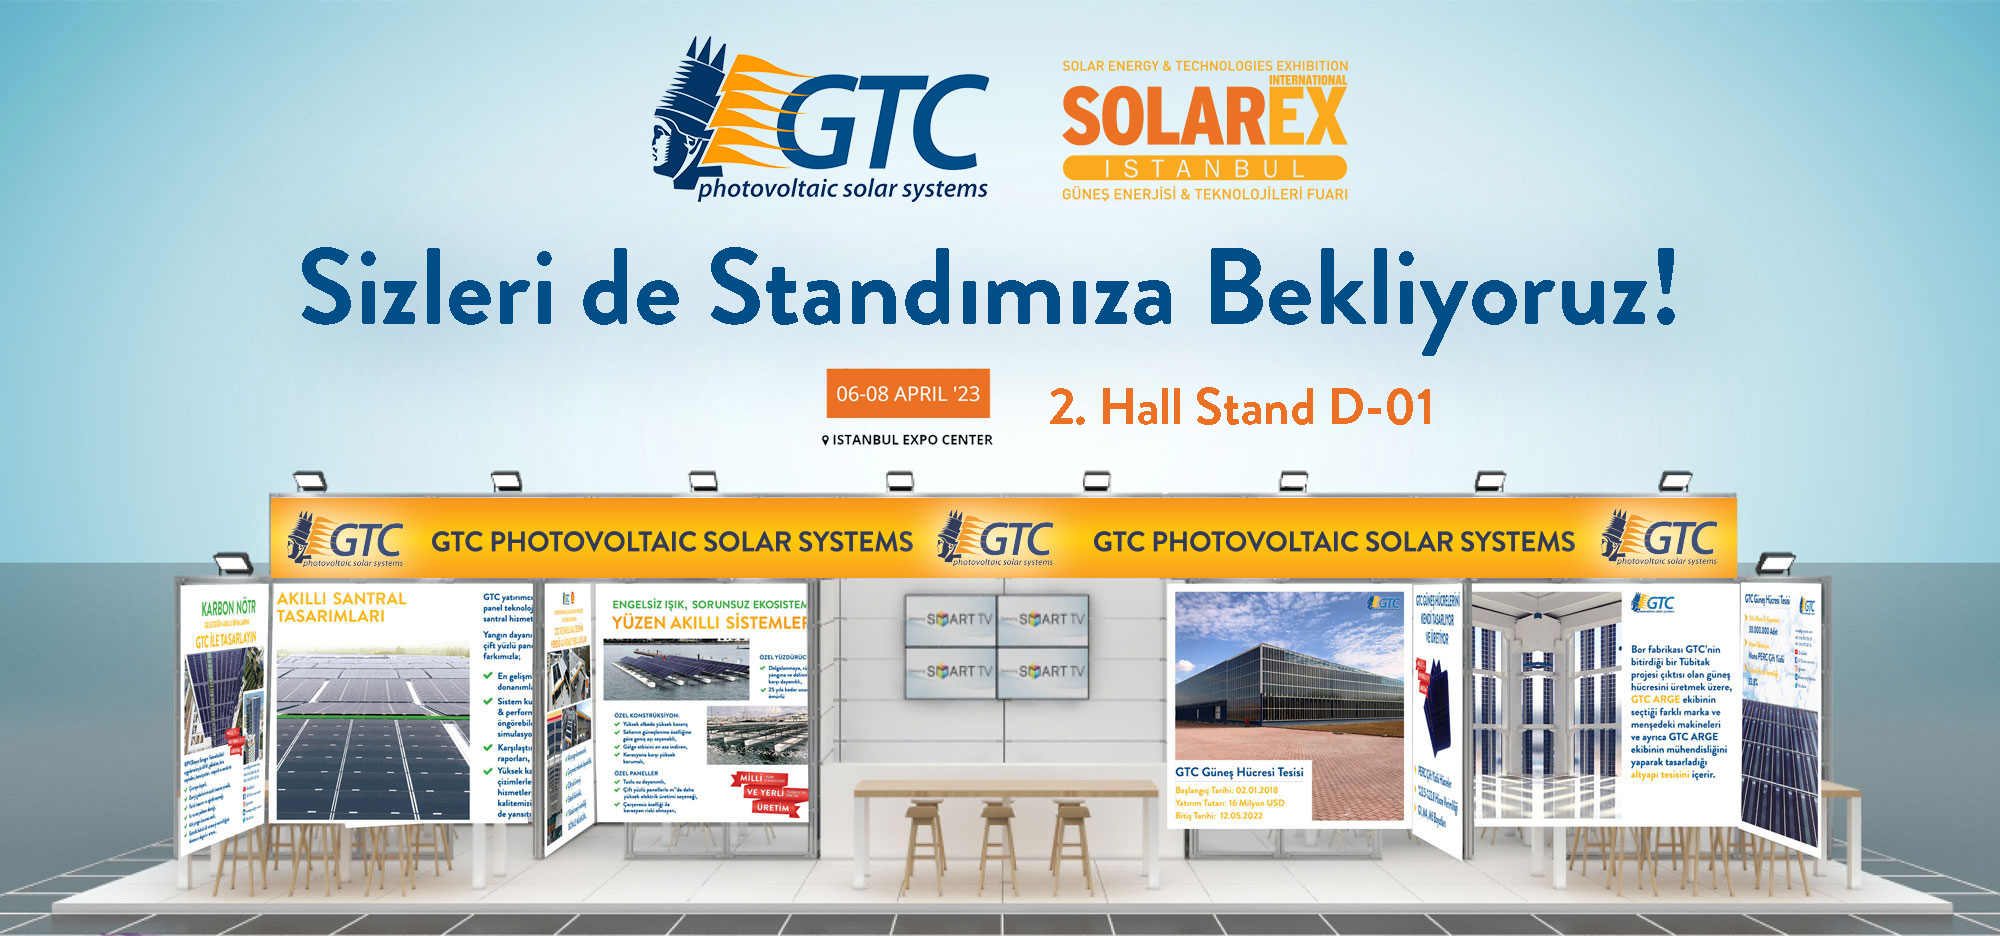 We participated in Solarex Istanbul Fair held on April 6-8, 2023.